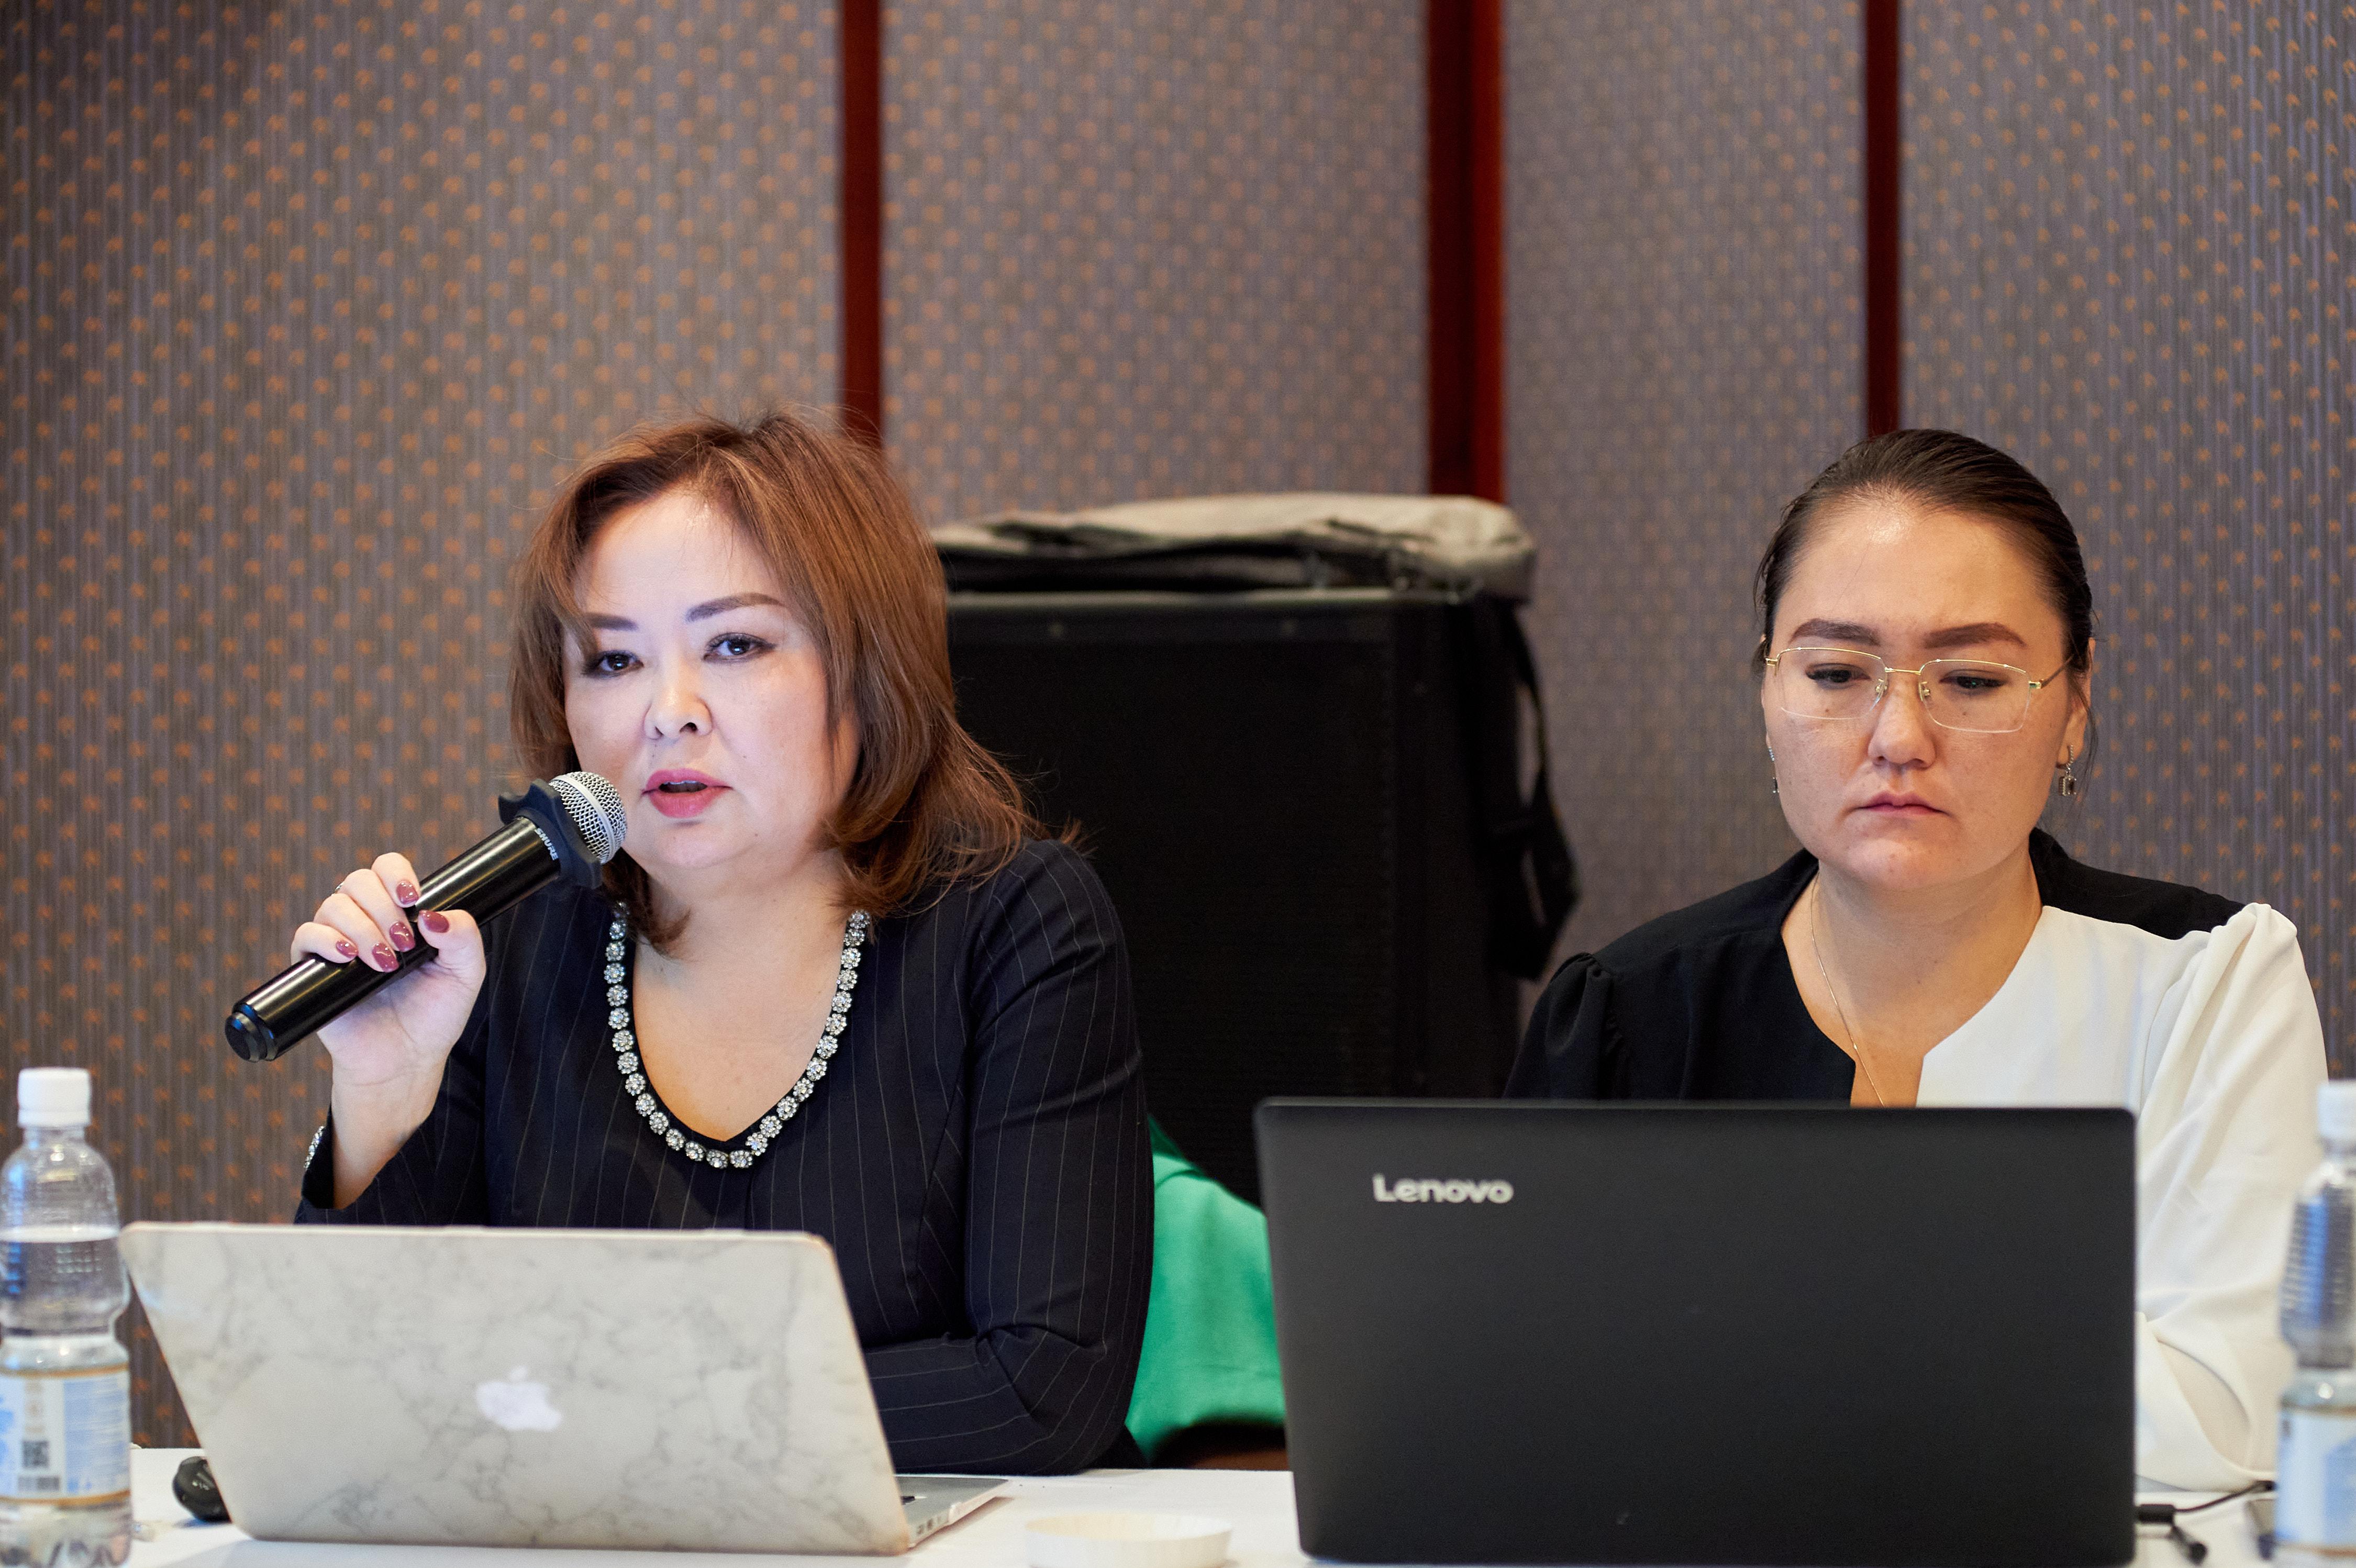 National training workshop of Kazakhstan on prevention of food poisoning during mass events was held on 26 and 27 October 2022 in Almaty, Kazakhstan